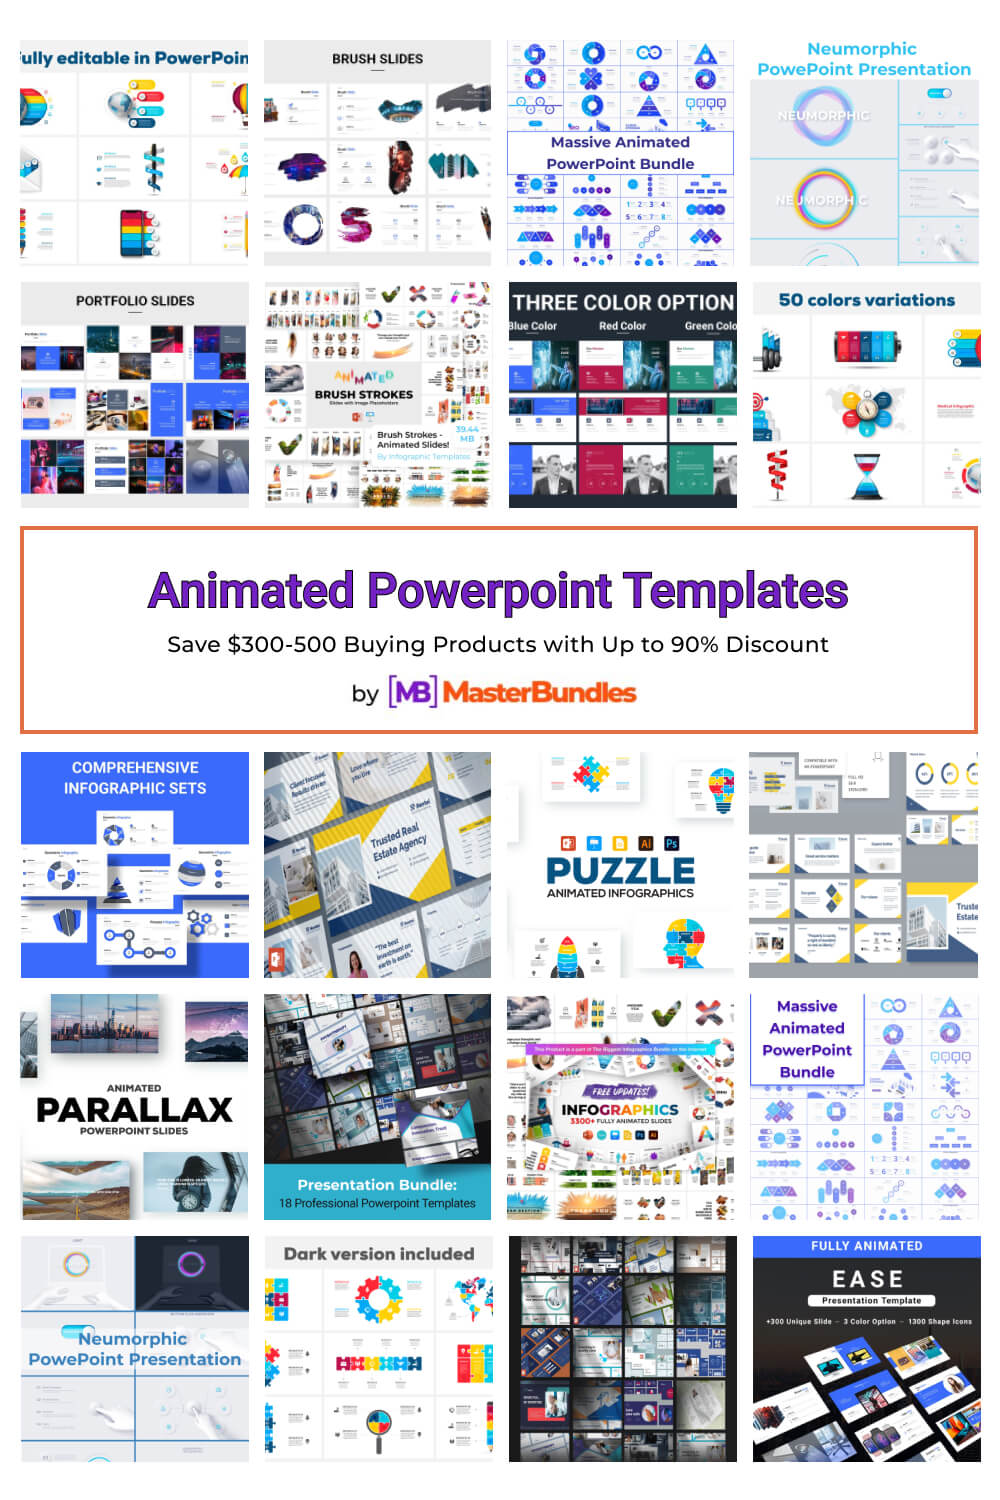 46+ Animated PowerPoint Templates 2023: Premium Products & Bundles - [MB]